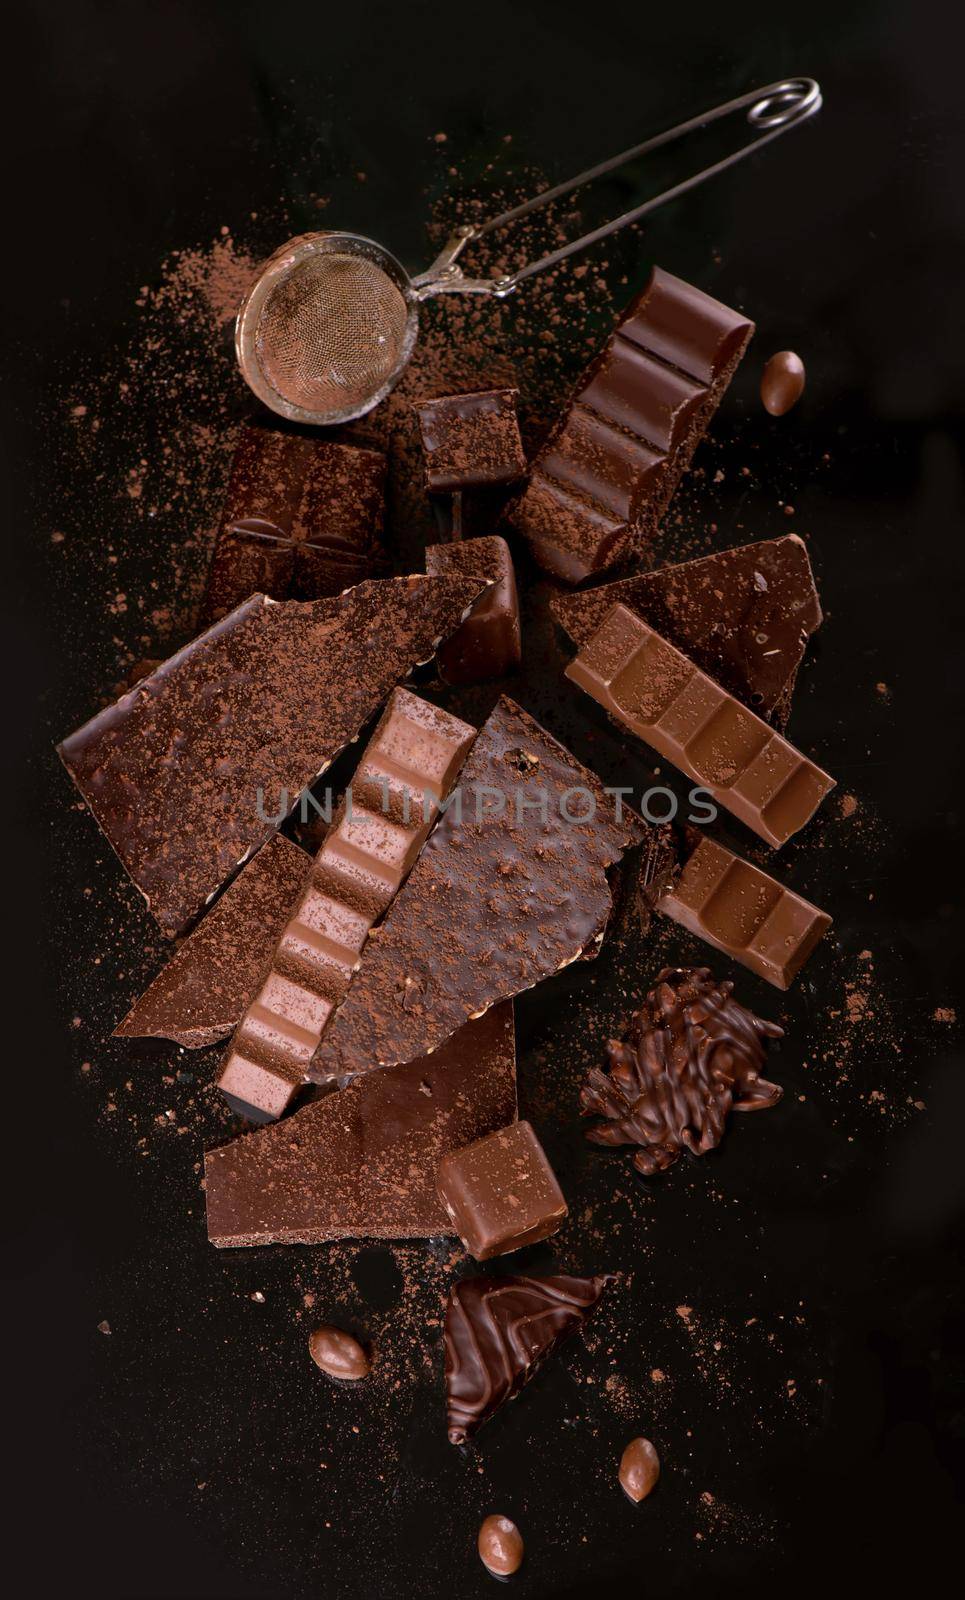 Broken chocolate pieces and cocoa powder on wooden background